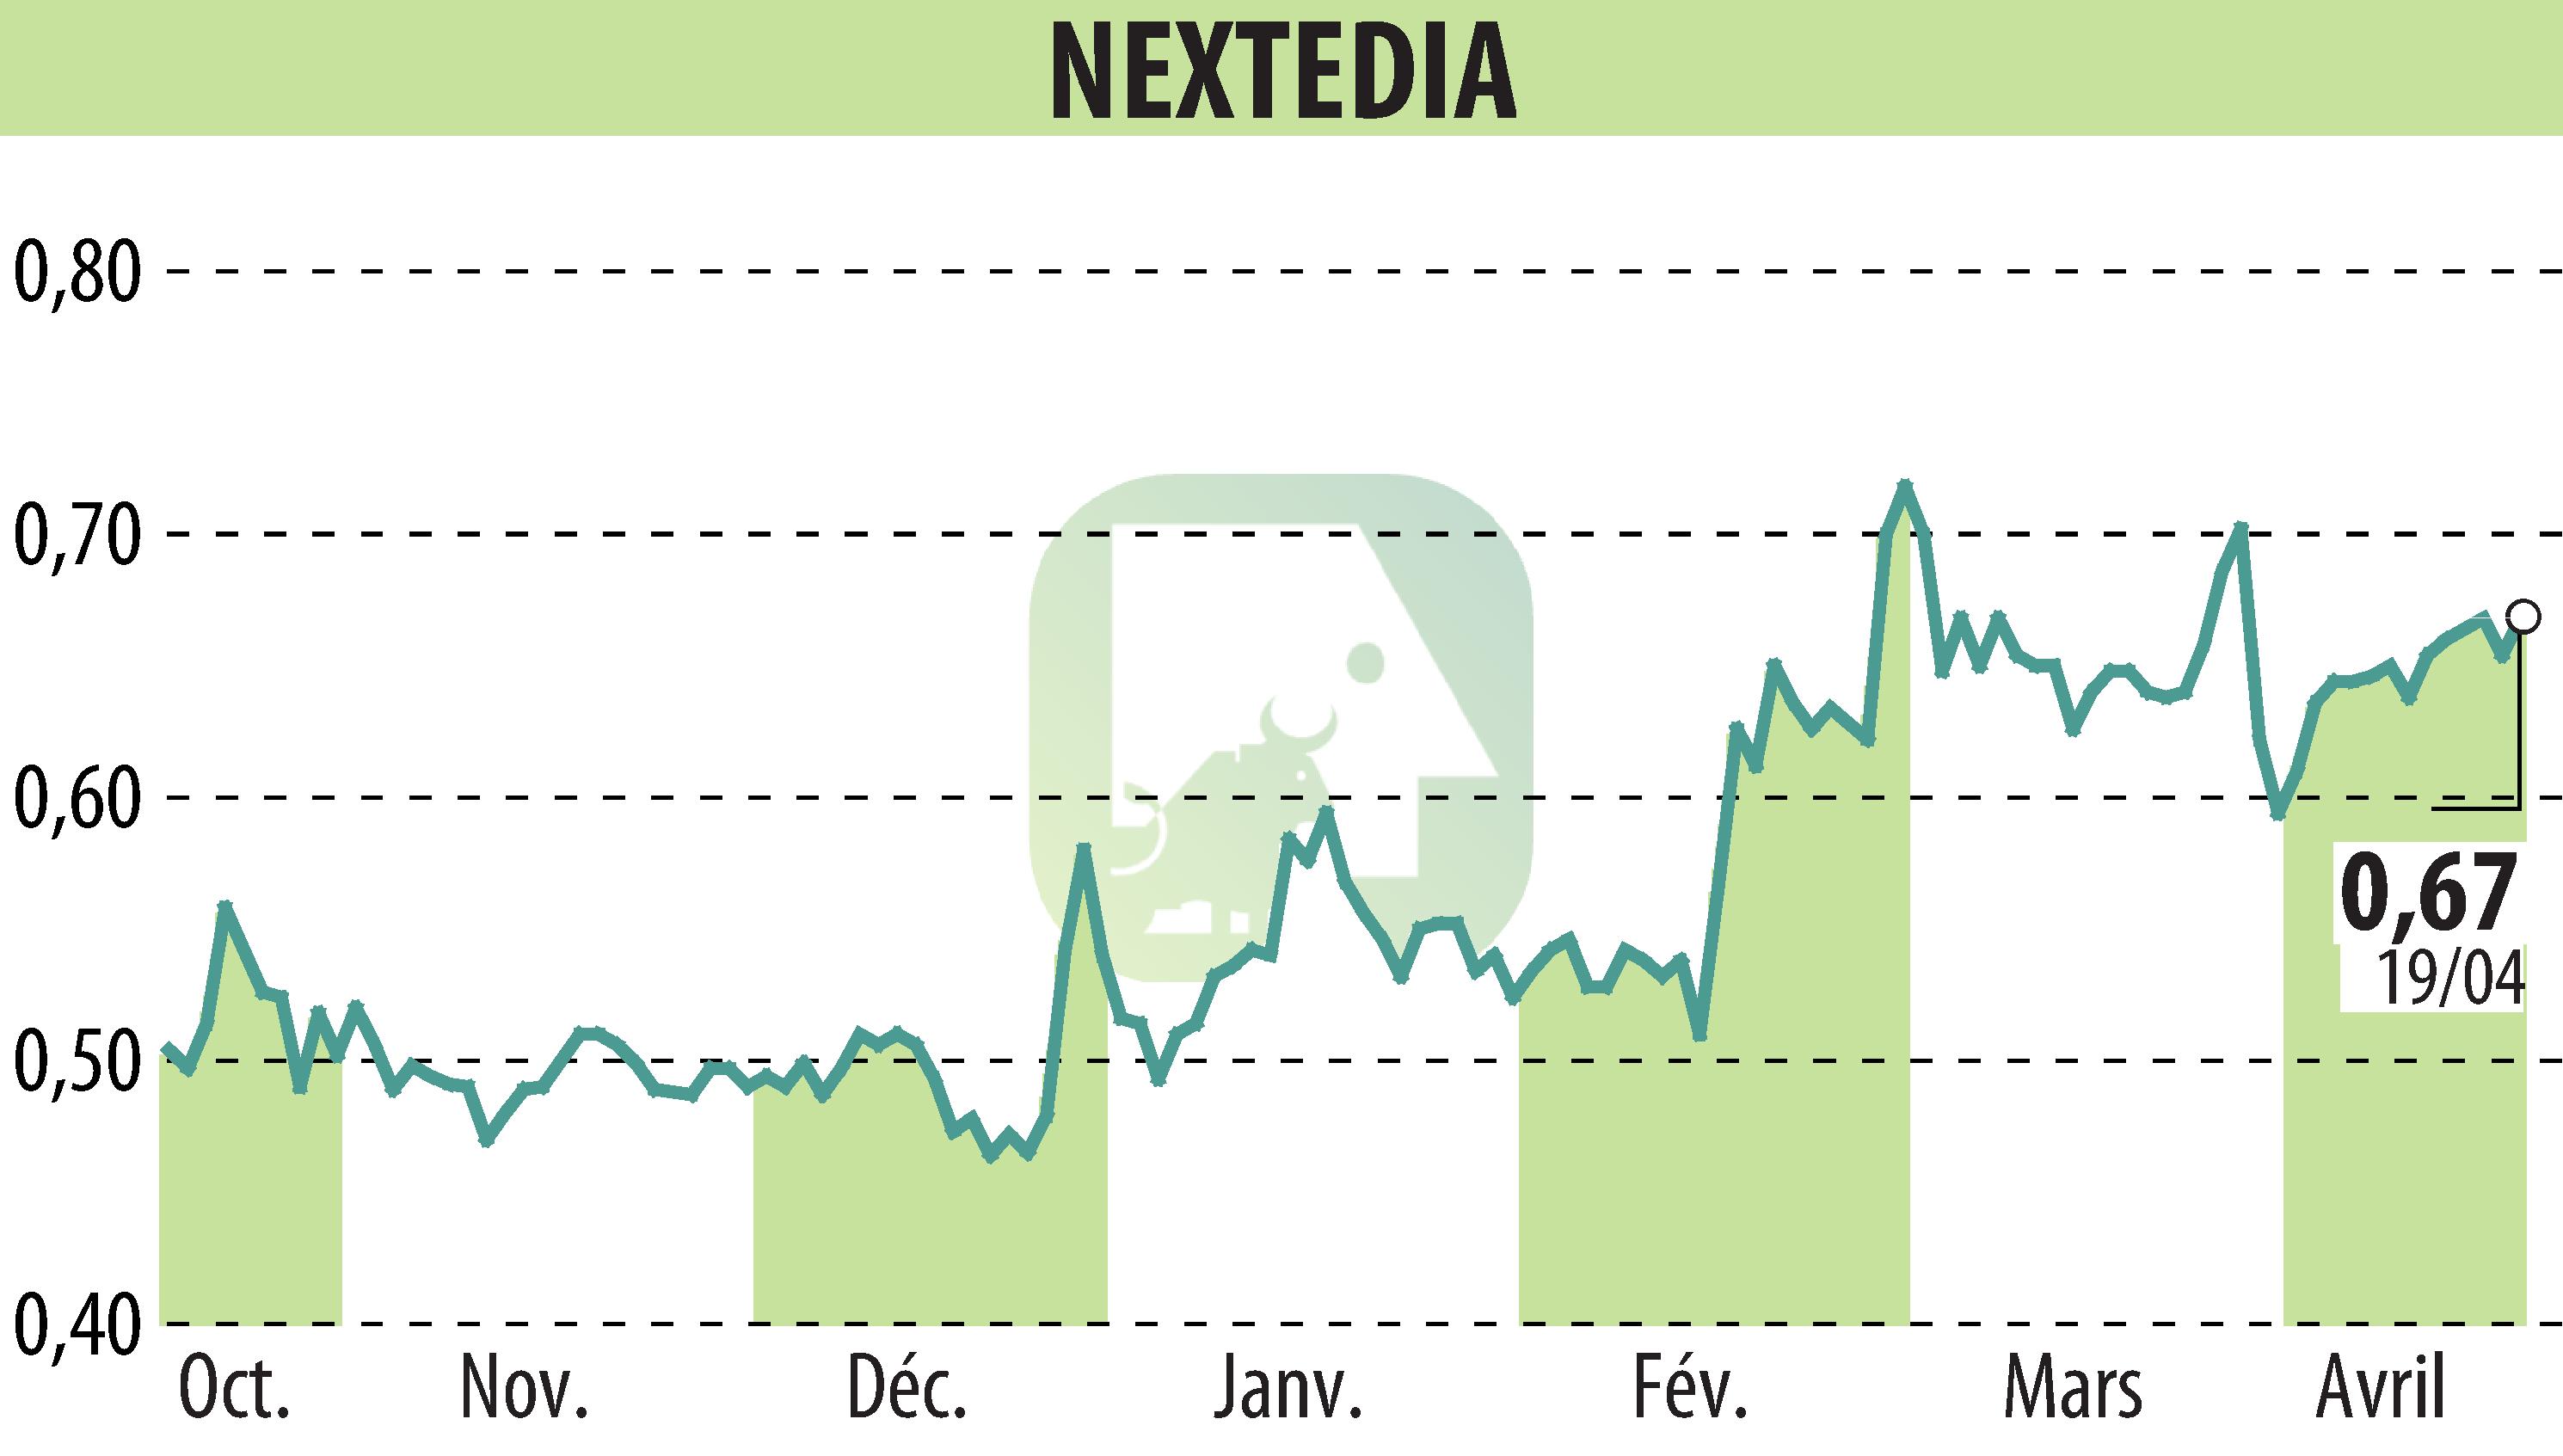 Stock price chart of NEXTEDIA (EPA:ALNXT) showing fluctuations.